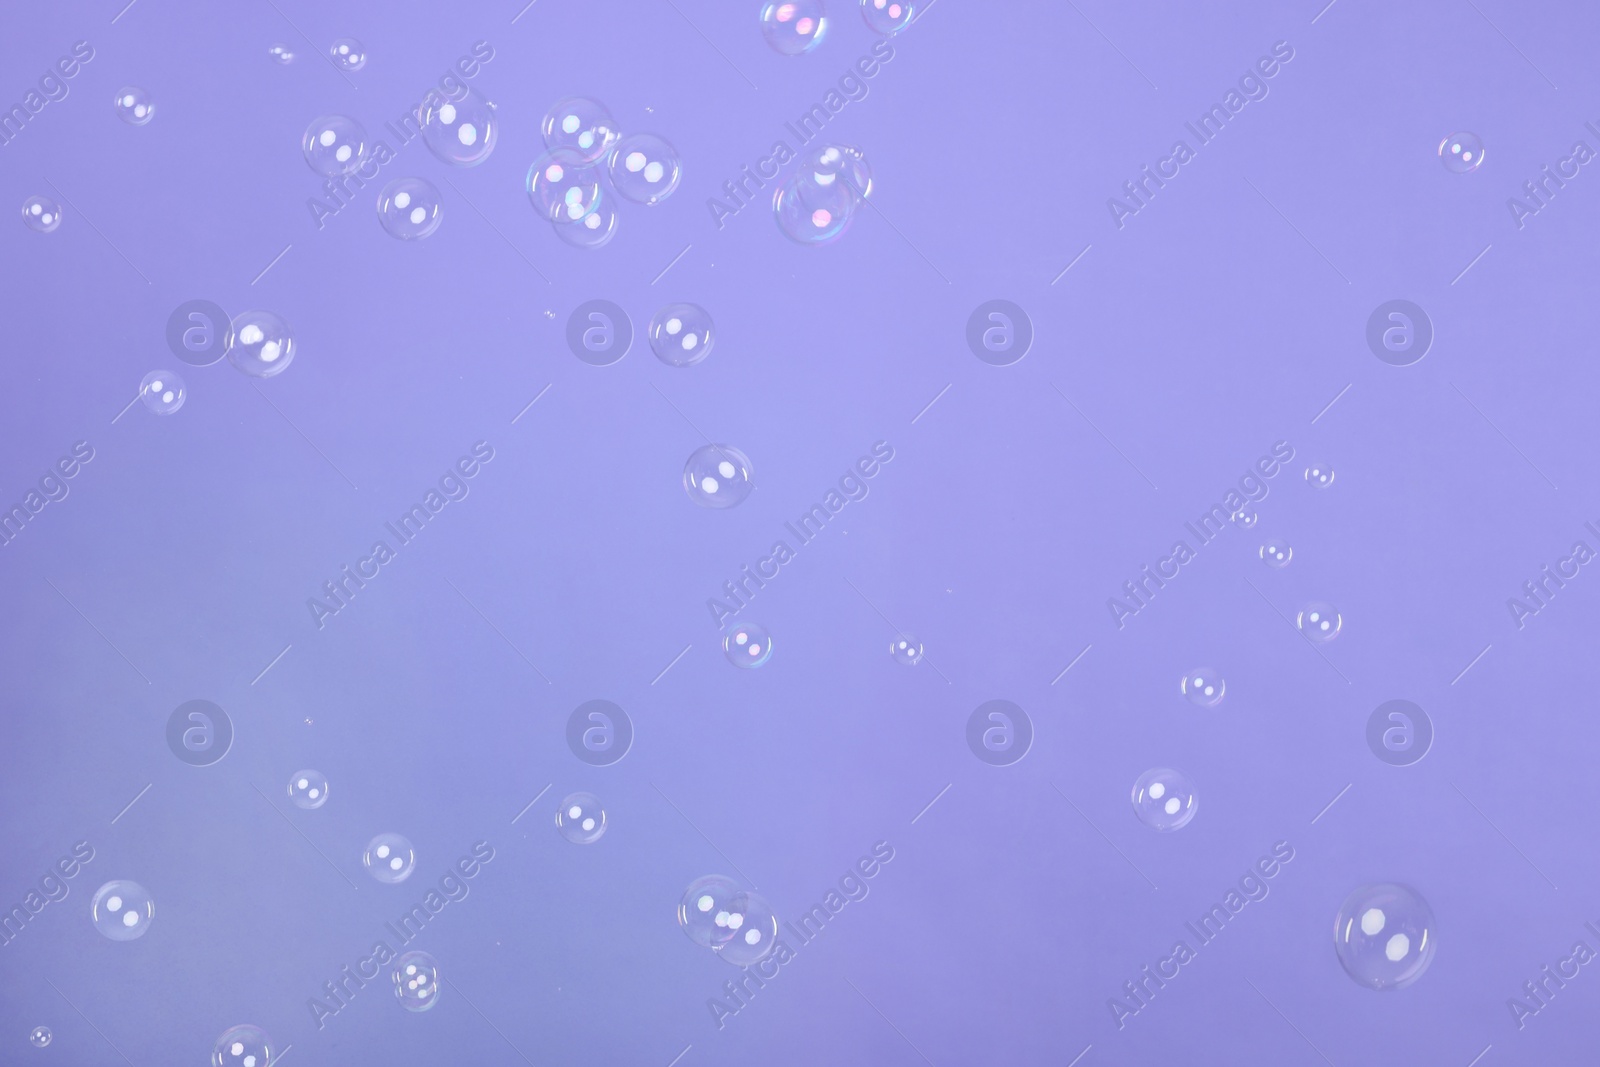 Photo of Many beautiful soap bubbles on violet background